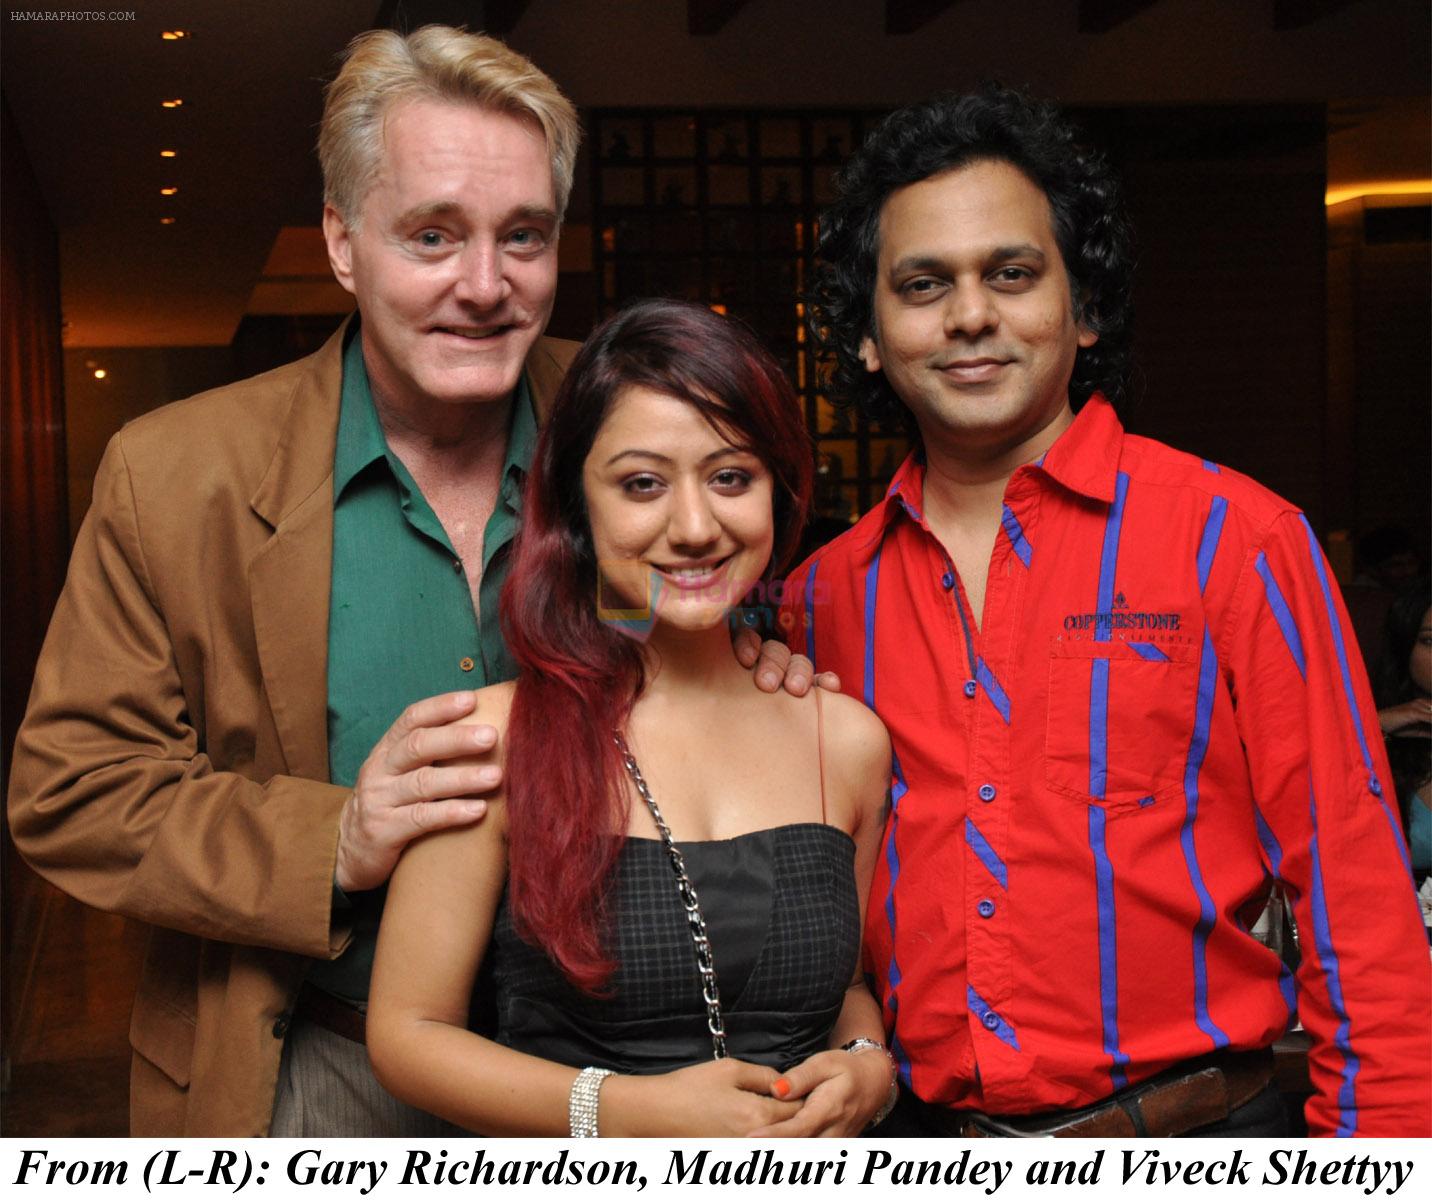 Gary Richardson, Madhuri Pandey and Viveck Shettyy at The International Womans Day Celebrations in The Grand Sarovar Premiere on 8th March 2012